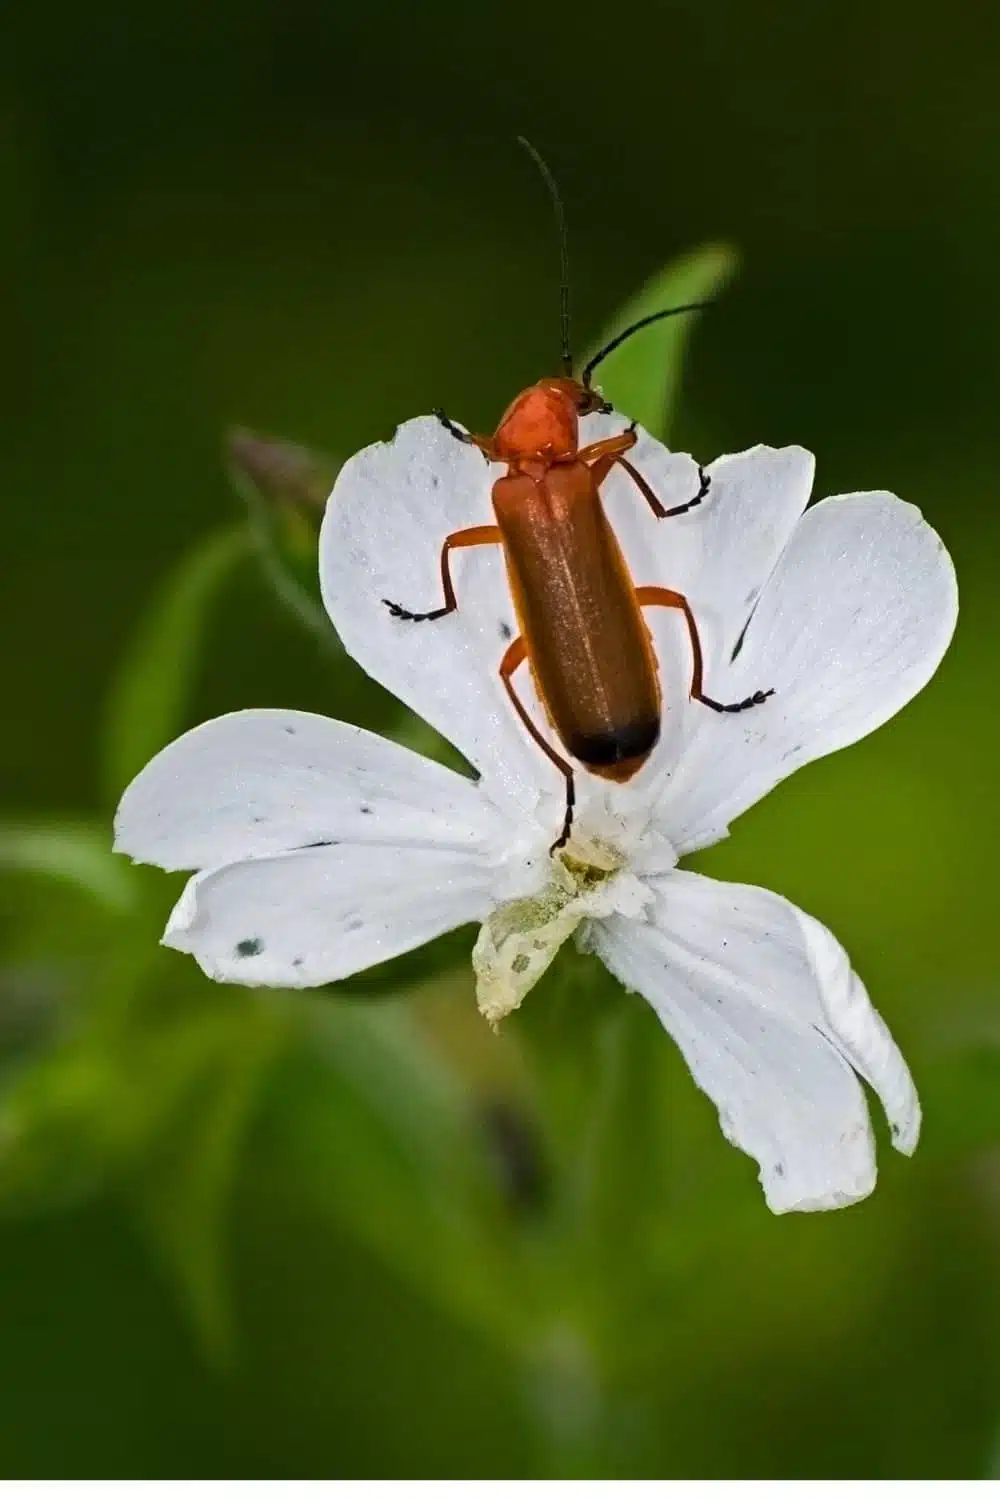 soldier beetle on a white flower